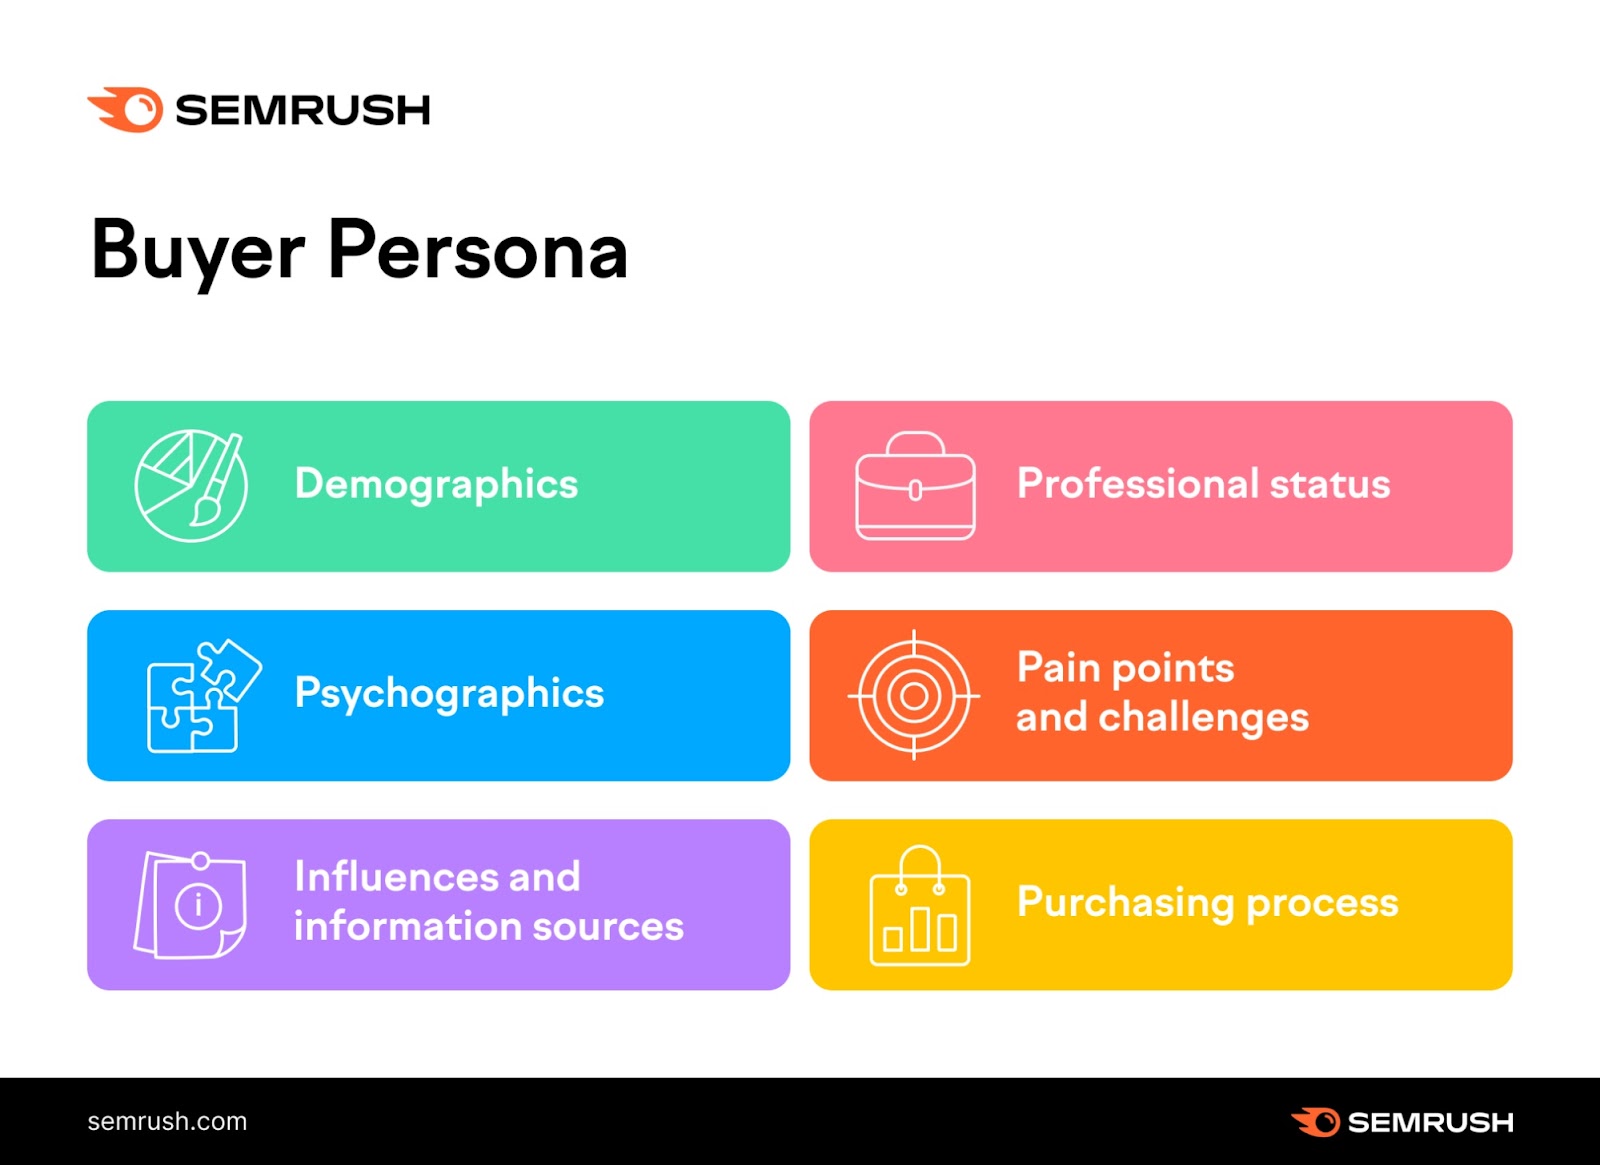 Buyer persona categories are demographics, professional status, psychographics, pain points and challenges, influences and information sources, and purchasing process